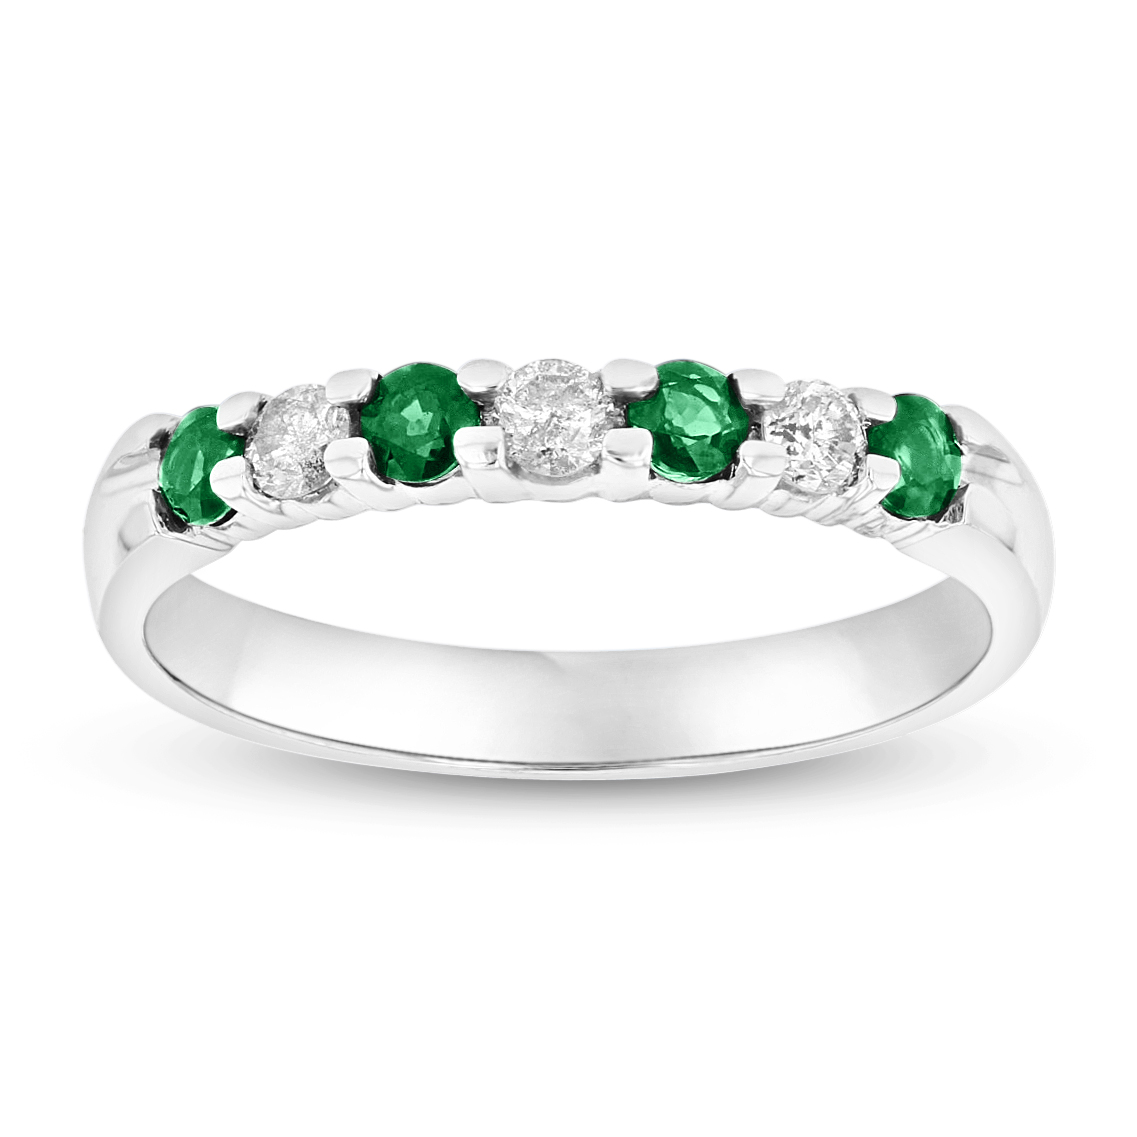 View 14K Gold Ring 0.35ct tw Round Diamonds and Emeralds Prong Set Band